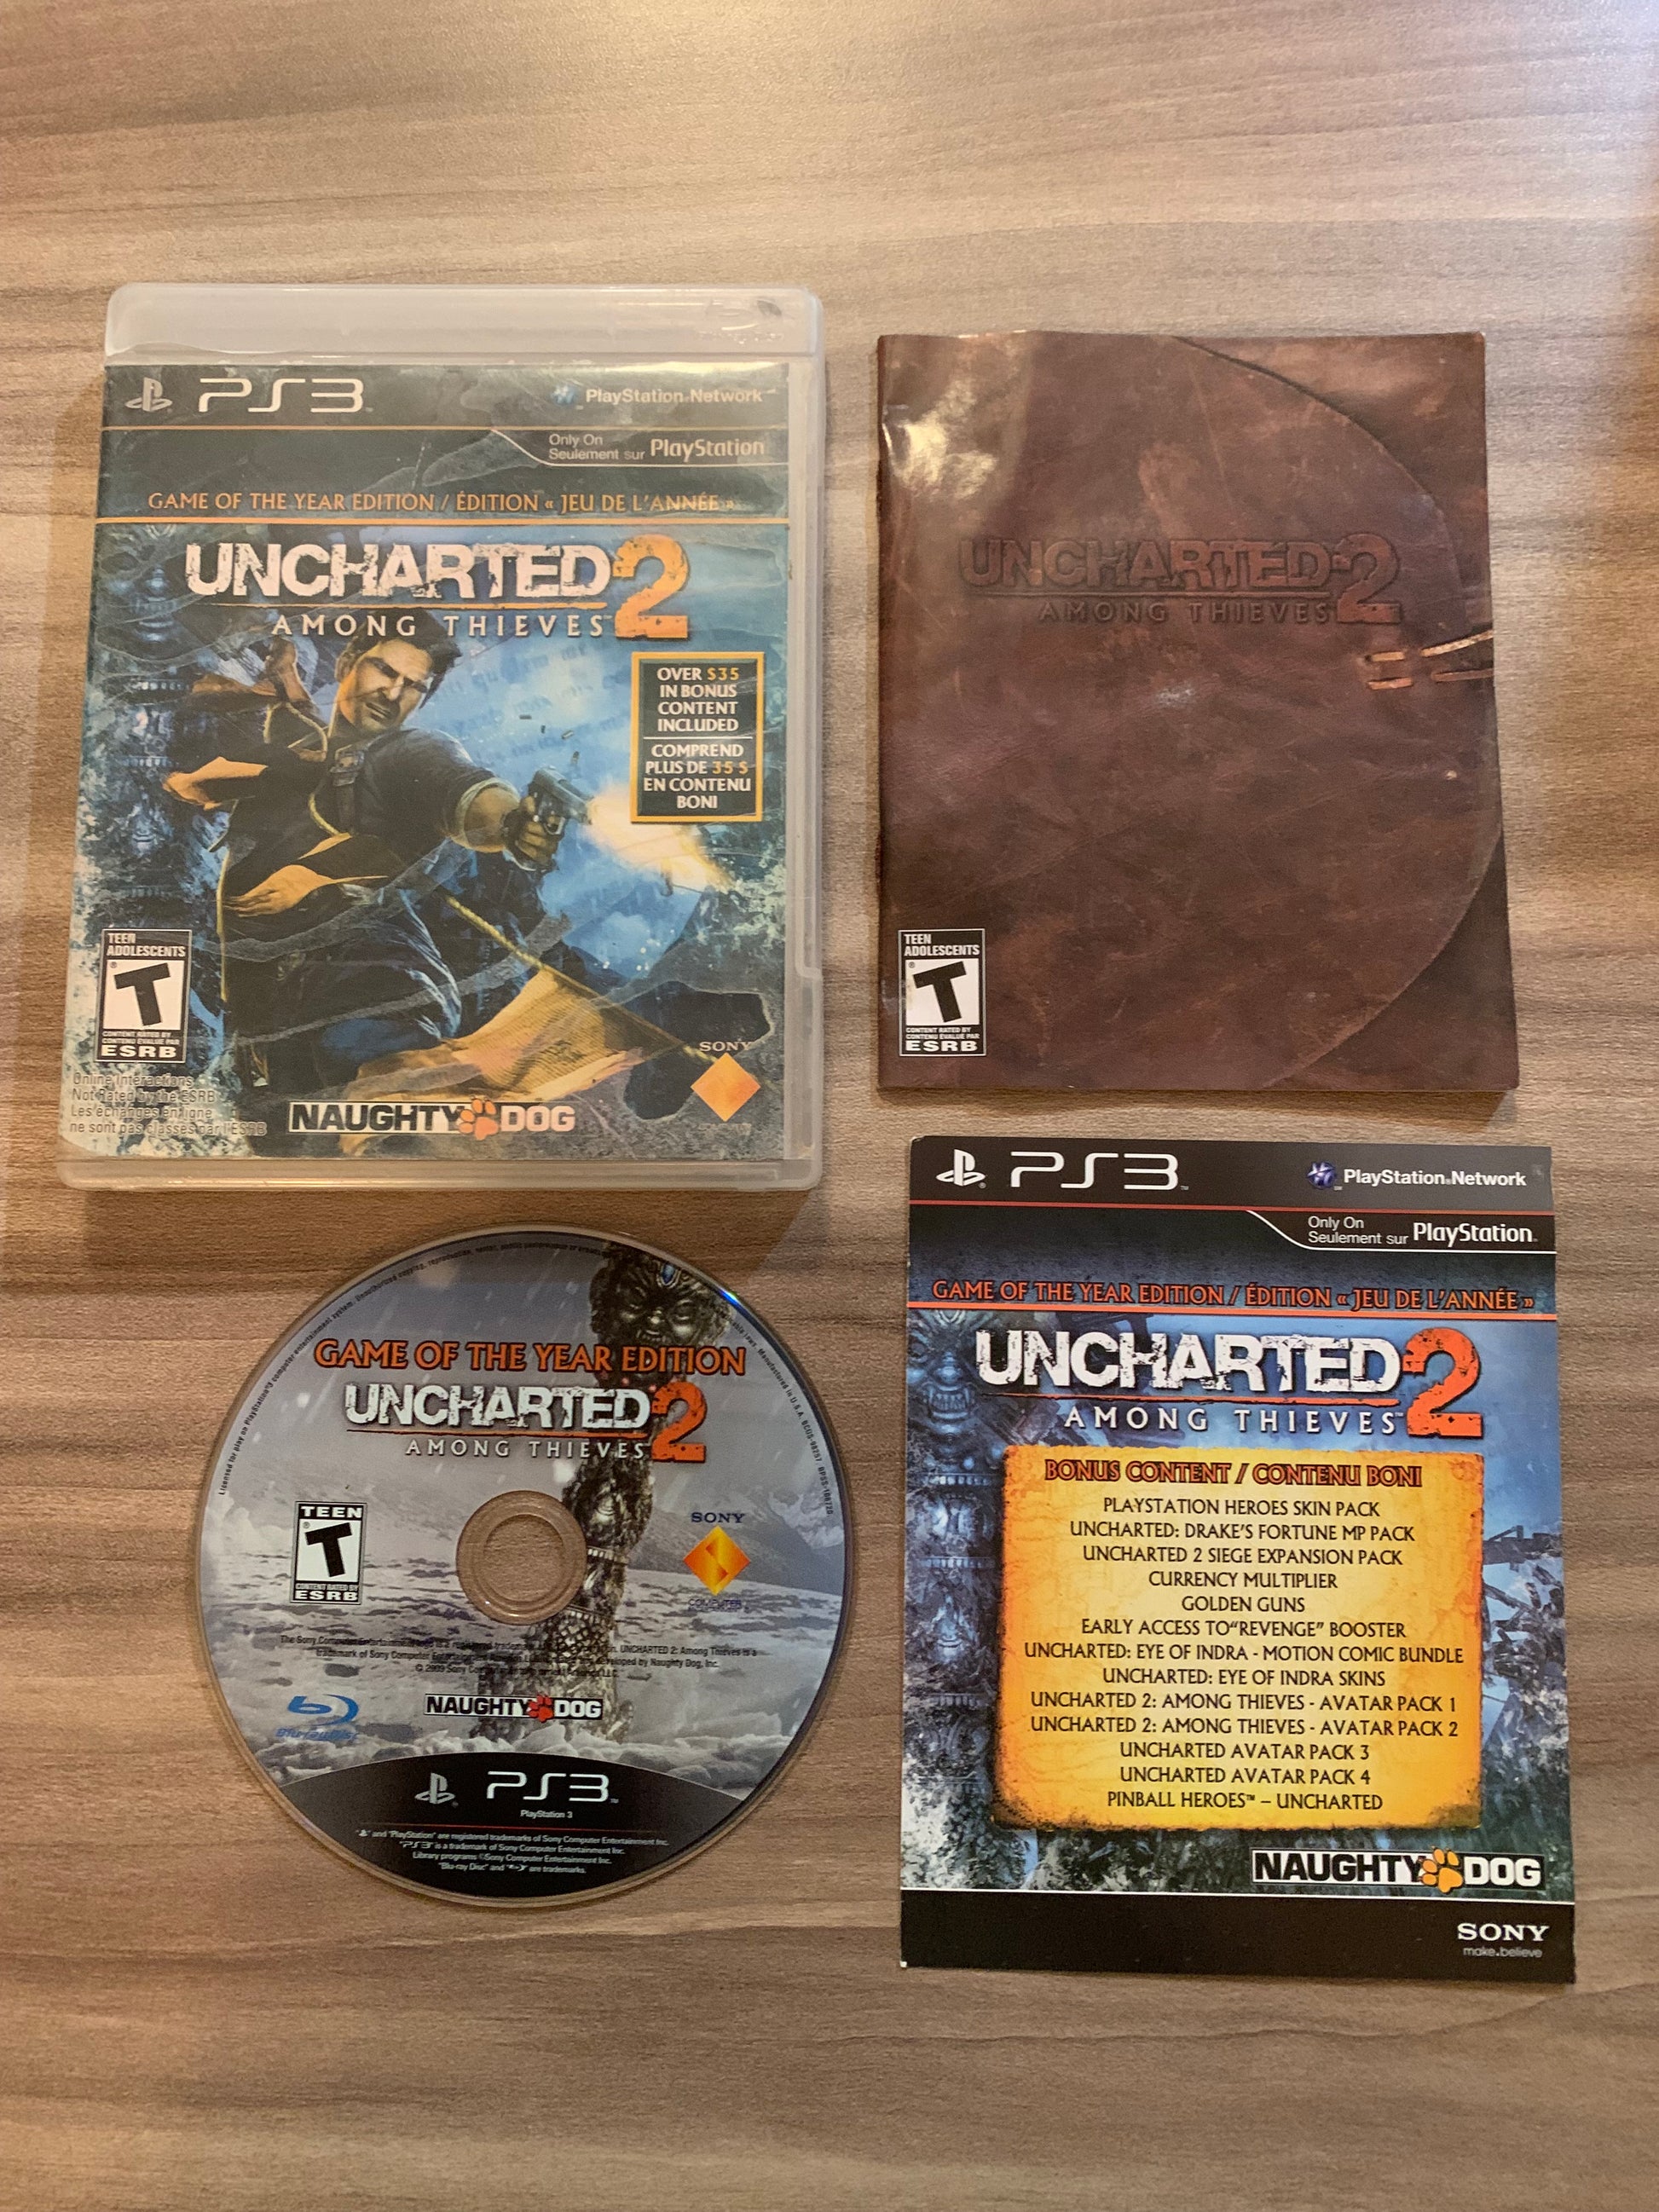 PiXEL-RETRO.COM : SONY PLAYSTATION 3 (PS3) COMPLET CIB BOX MANUAL GAME NTSC UNCHARTED 2 AMONG THIEVES GAME OF THE YEAR EDITION